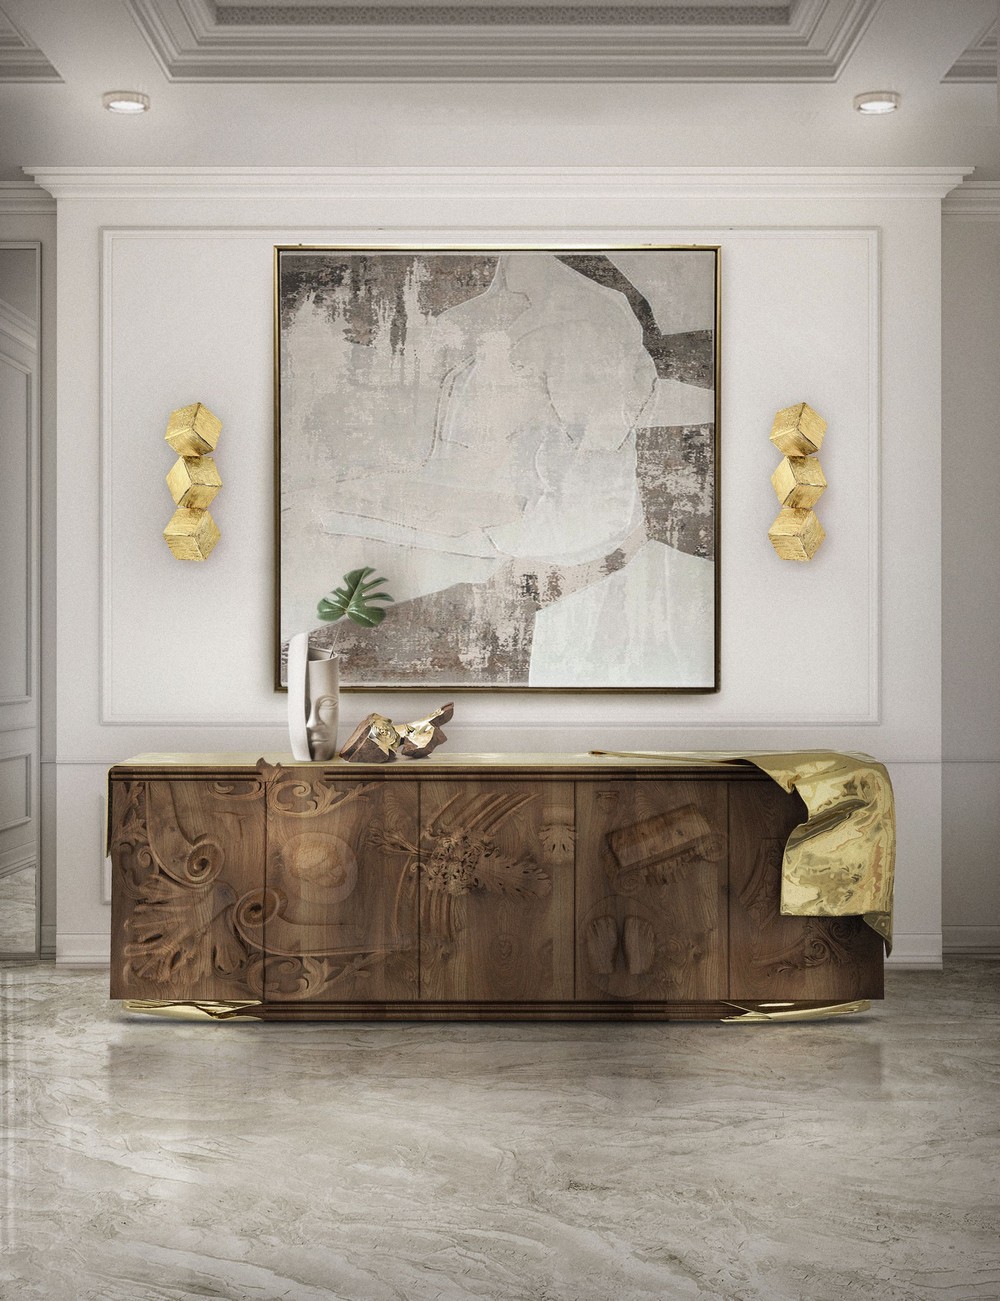 Interior Design For All: 7 Sideboards, 7 Styles